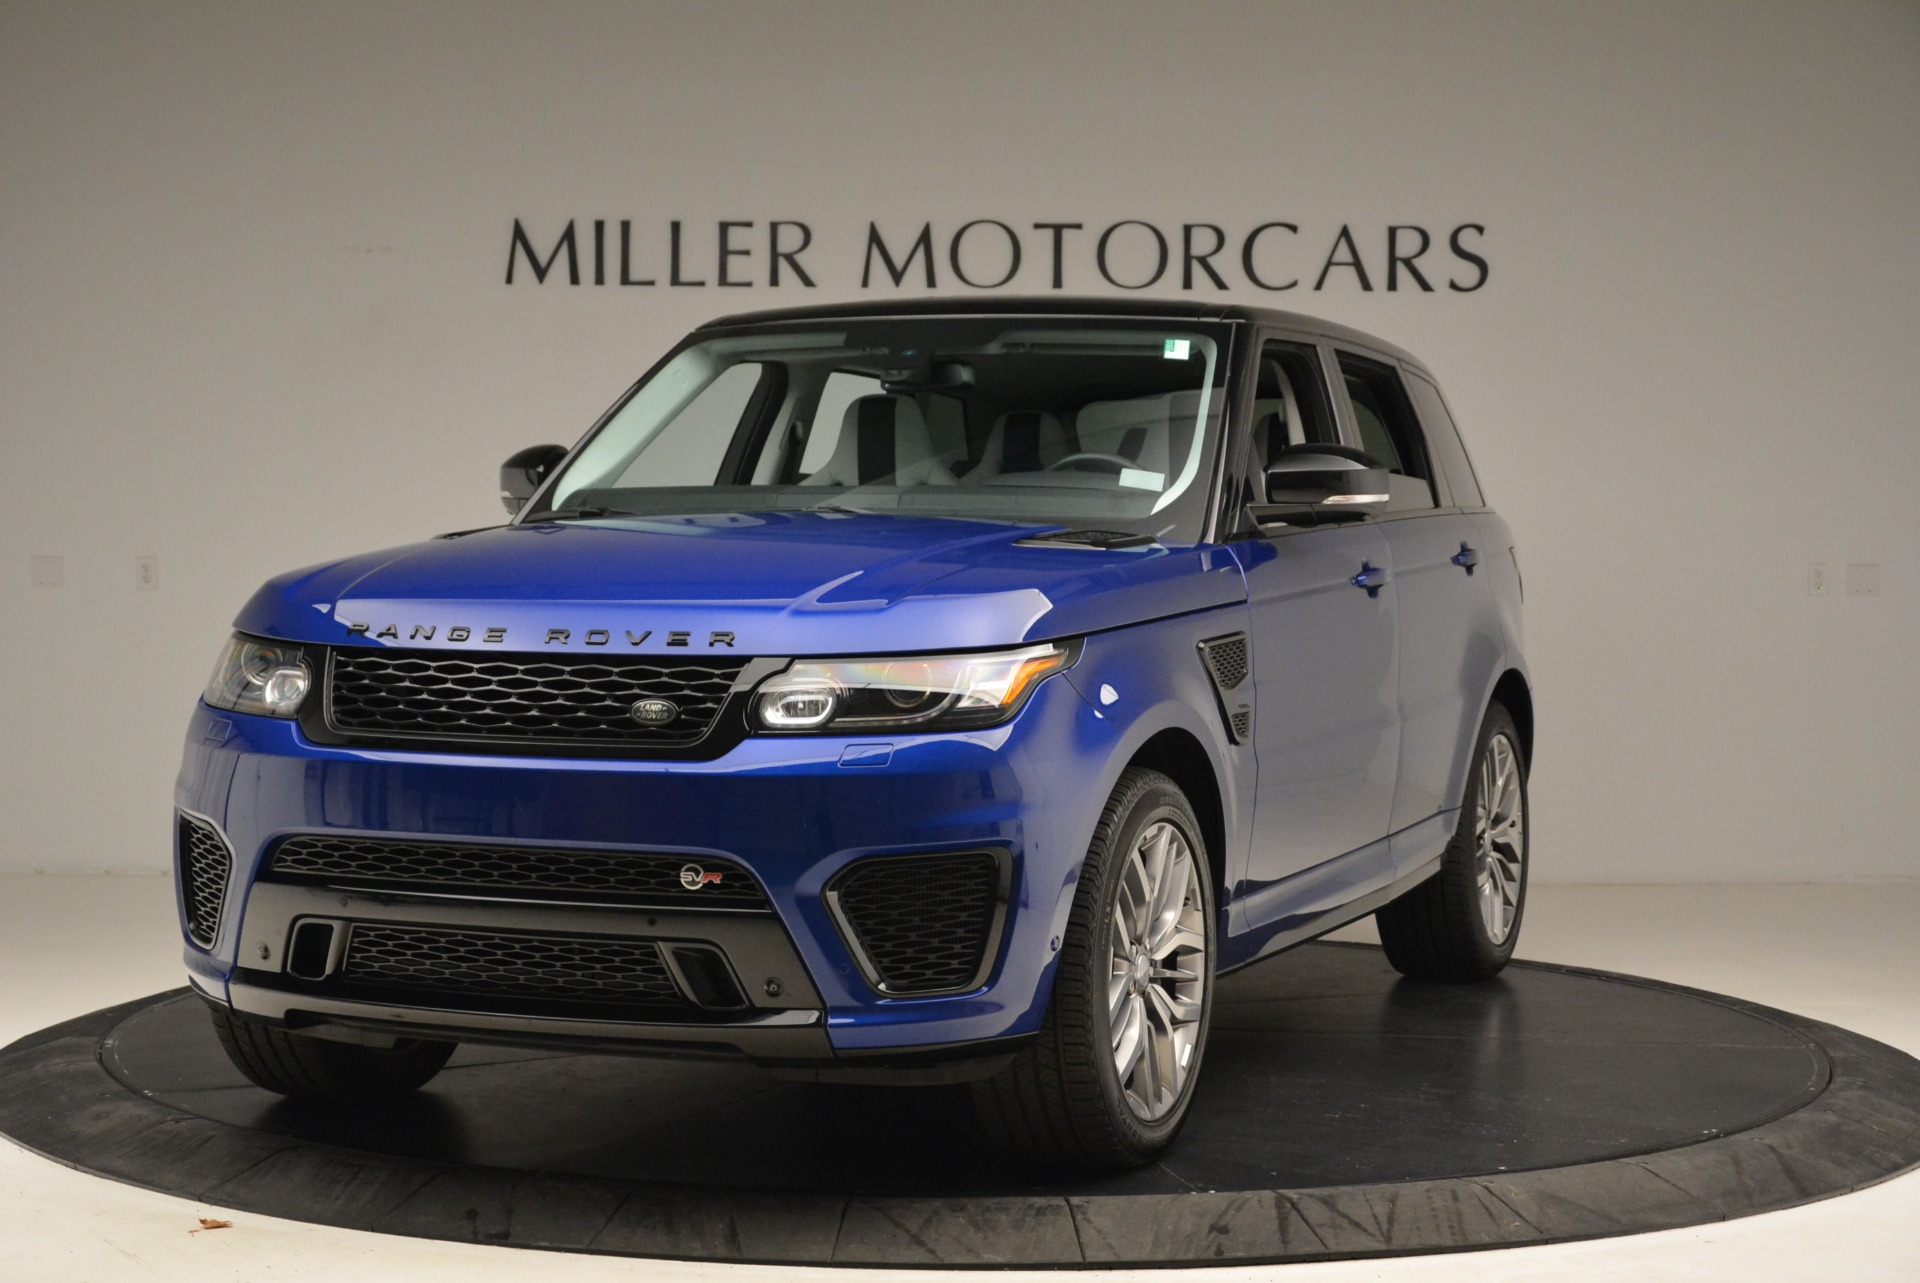 Used 2015 Land Rover Range Rover Sport SVR for sale Sold at Aston Martin of Greenwich in Greenwich CT 06830 1